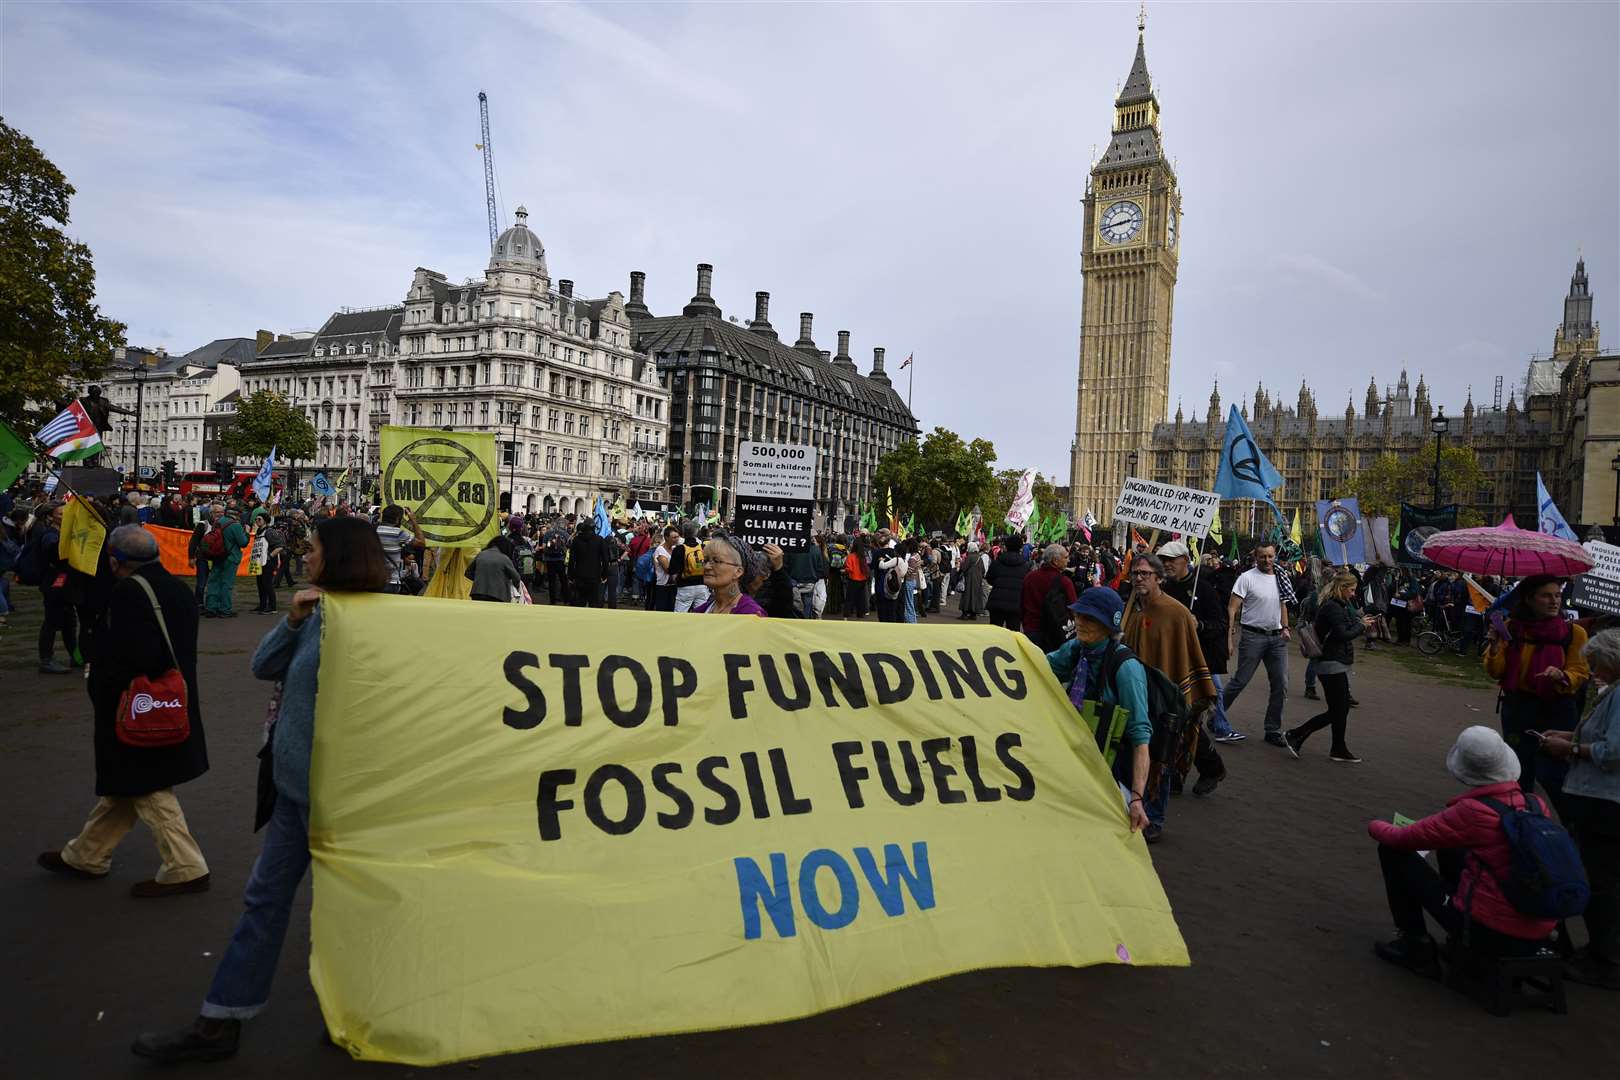 Demonstrators at an Extinction Rebellion protest in London’s Parliament Square (Beresford Hodge/PA)